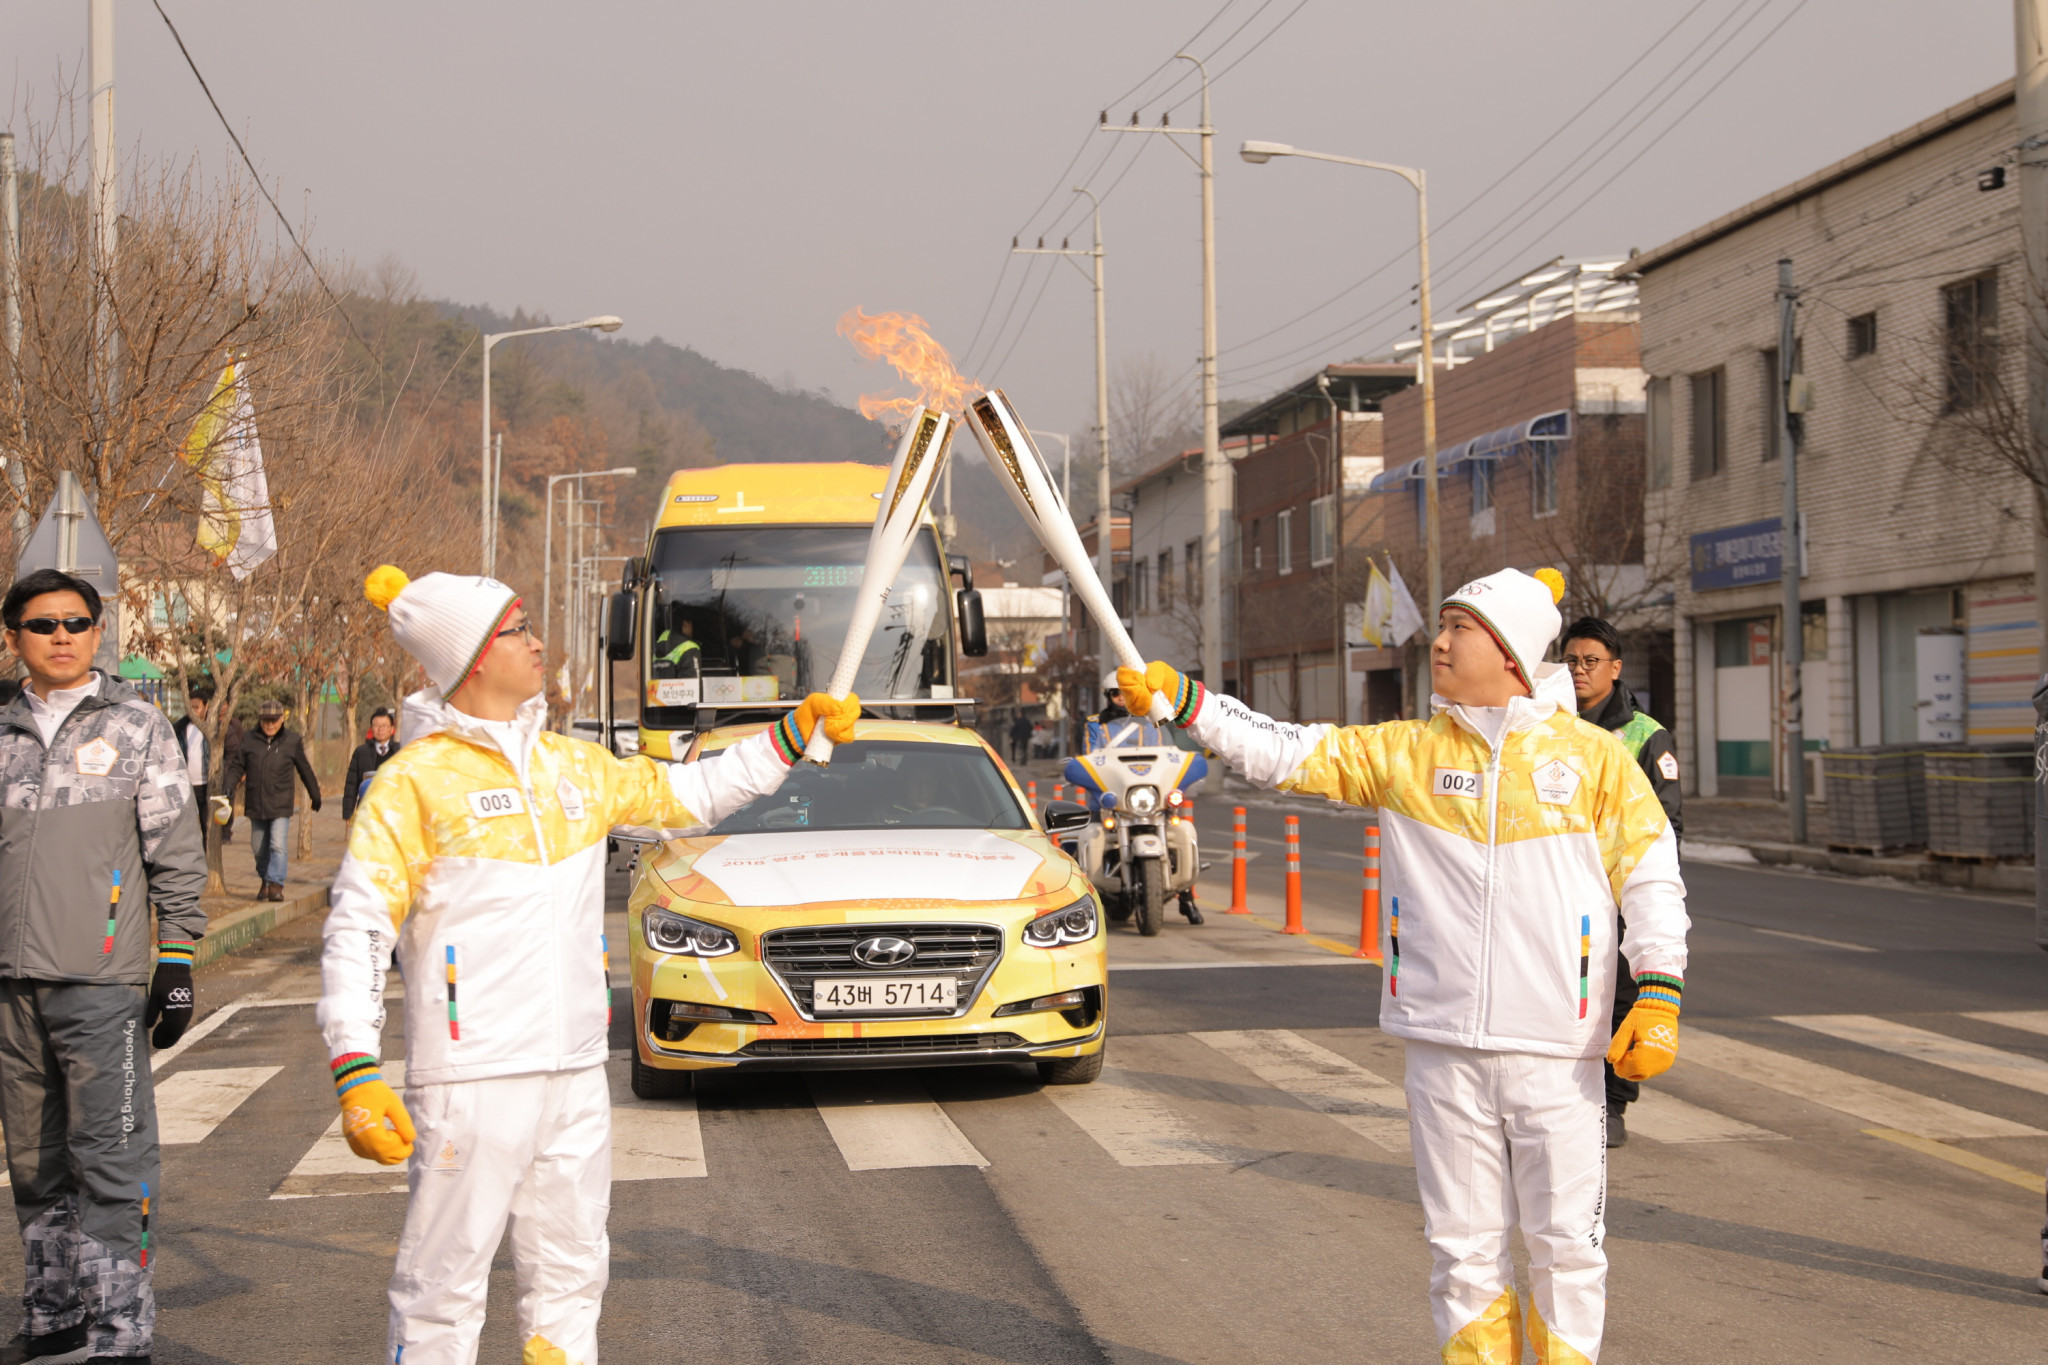 The Olympic Torch Relay for Pyeongchang 2018 resumed today after it was cancelled yesterday following the devastating fire in  Jecheon ©Pyeongchang 2018 